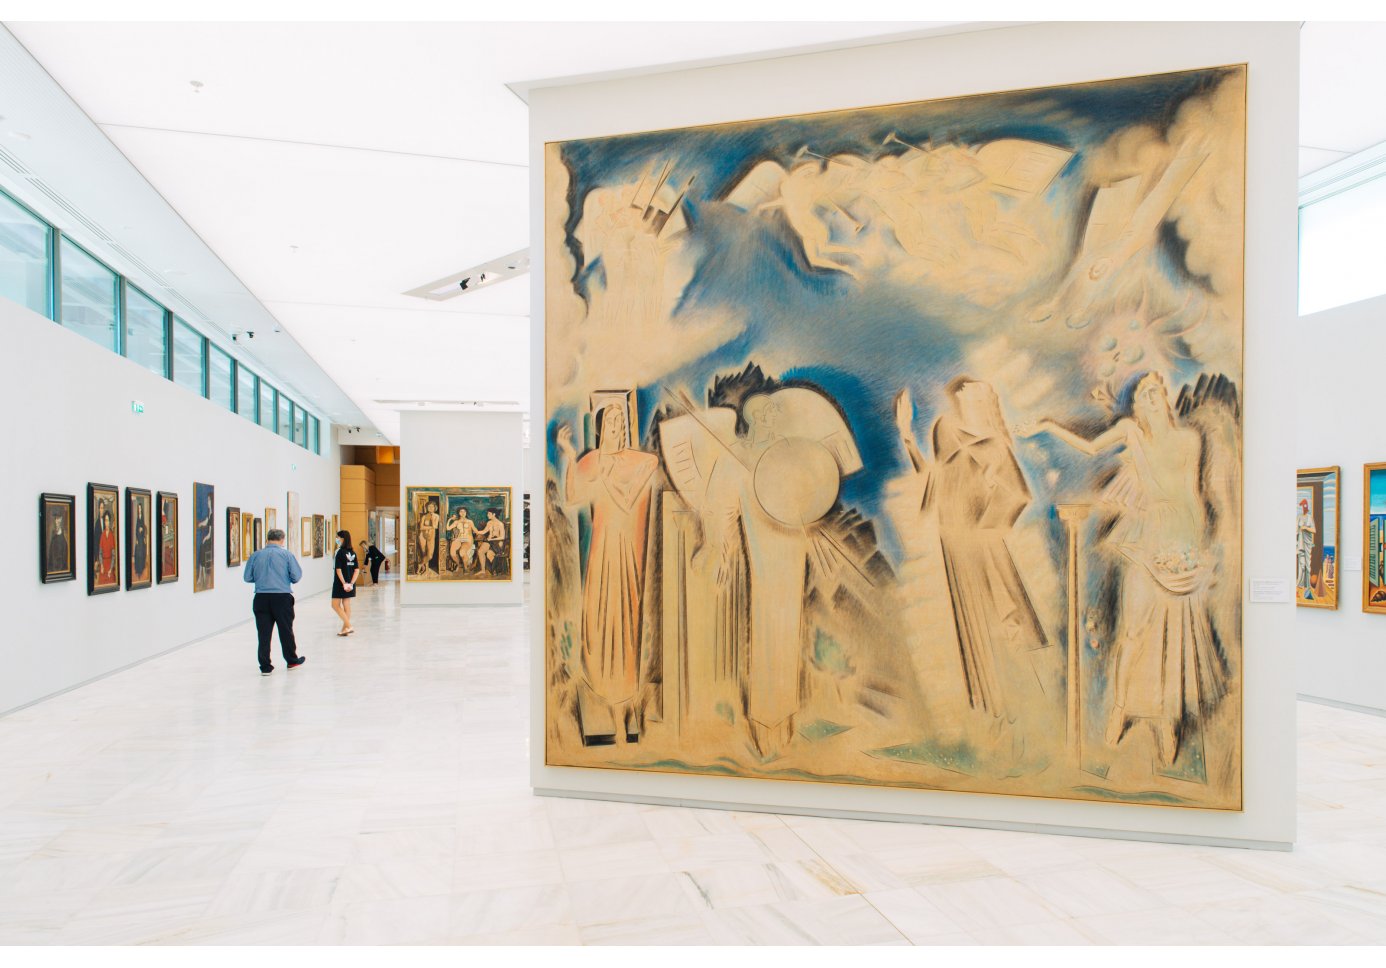 The Apotheosis of Athanasios Diakos by Konstantinos Parthenis at the National Gallery of Greece in Athens